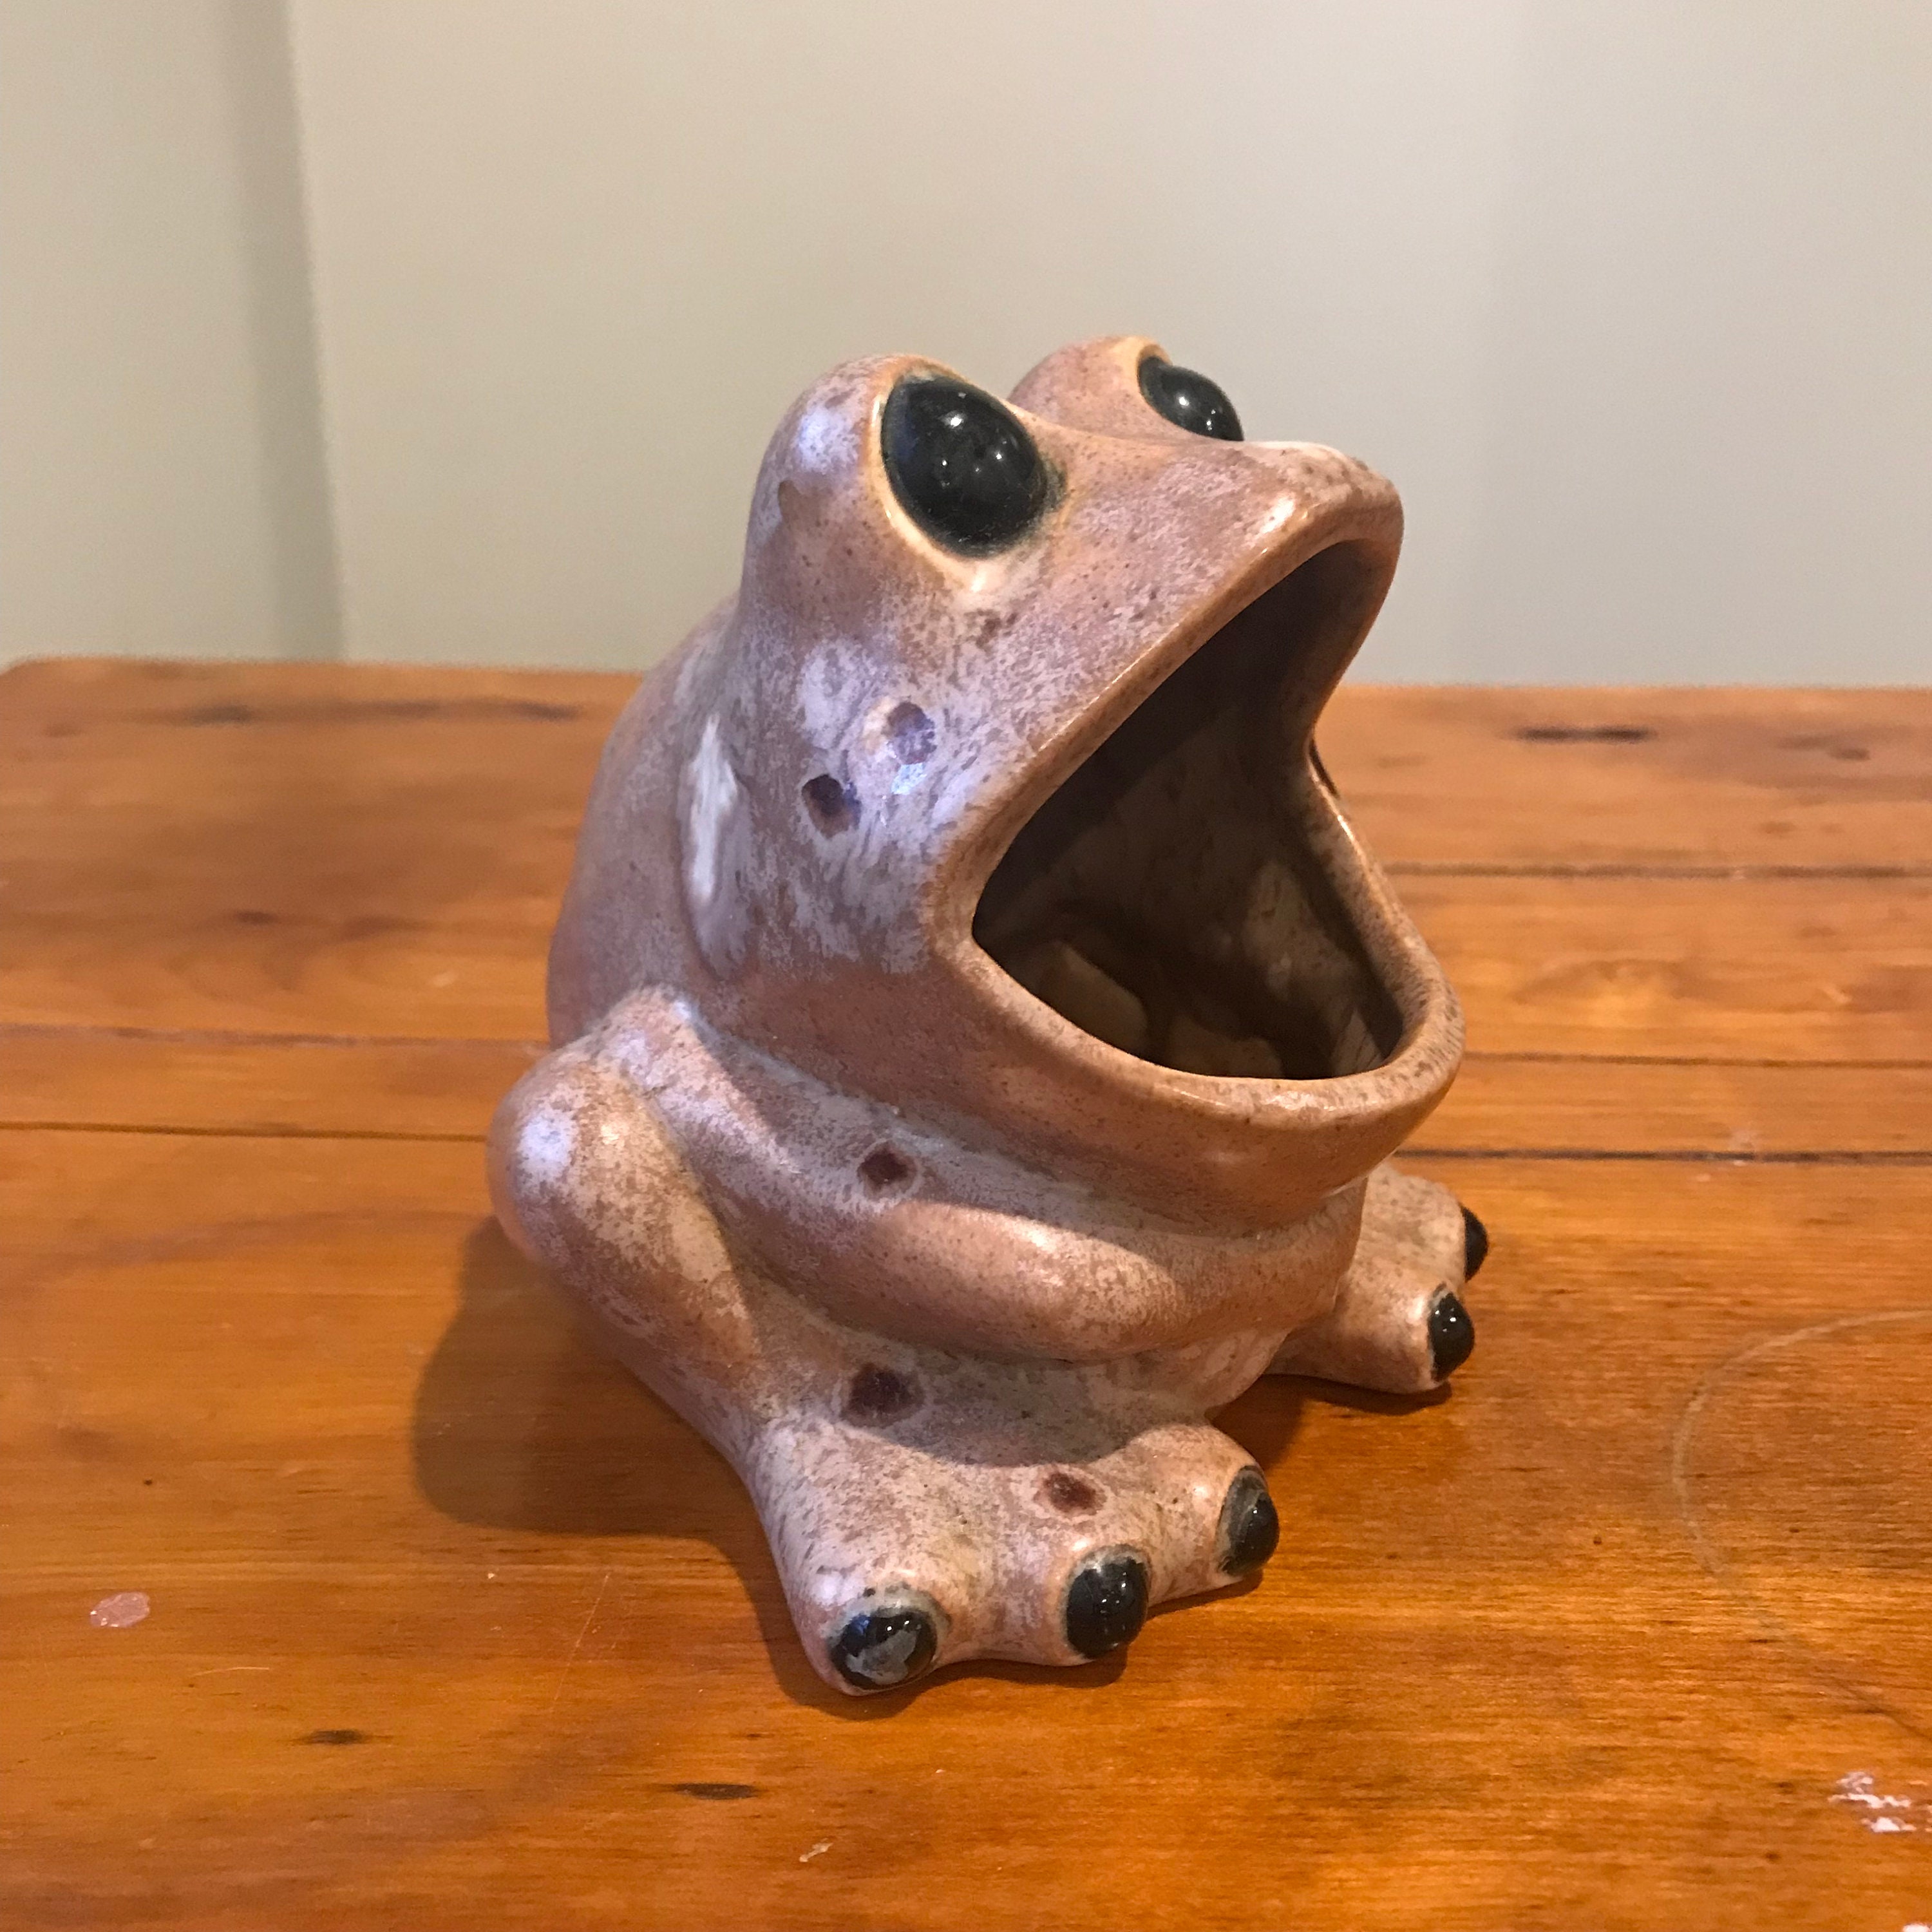 Vintage ceramic frog sponge/soap holder. 5” tall and 7” wide Marked 1975 on  bottom for Sale in Lakewood, WA - OfferUp